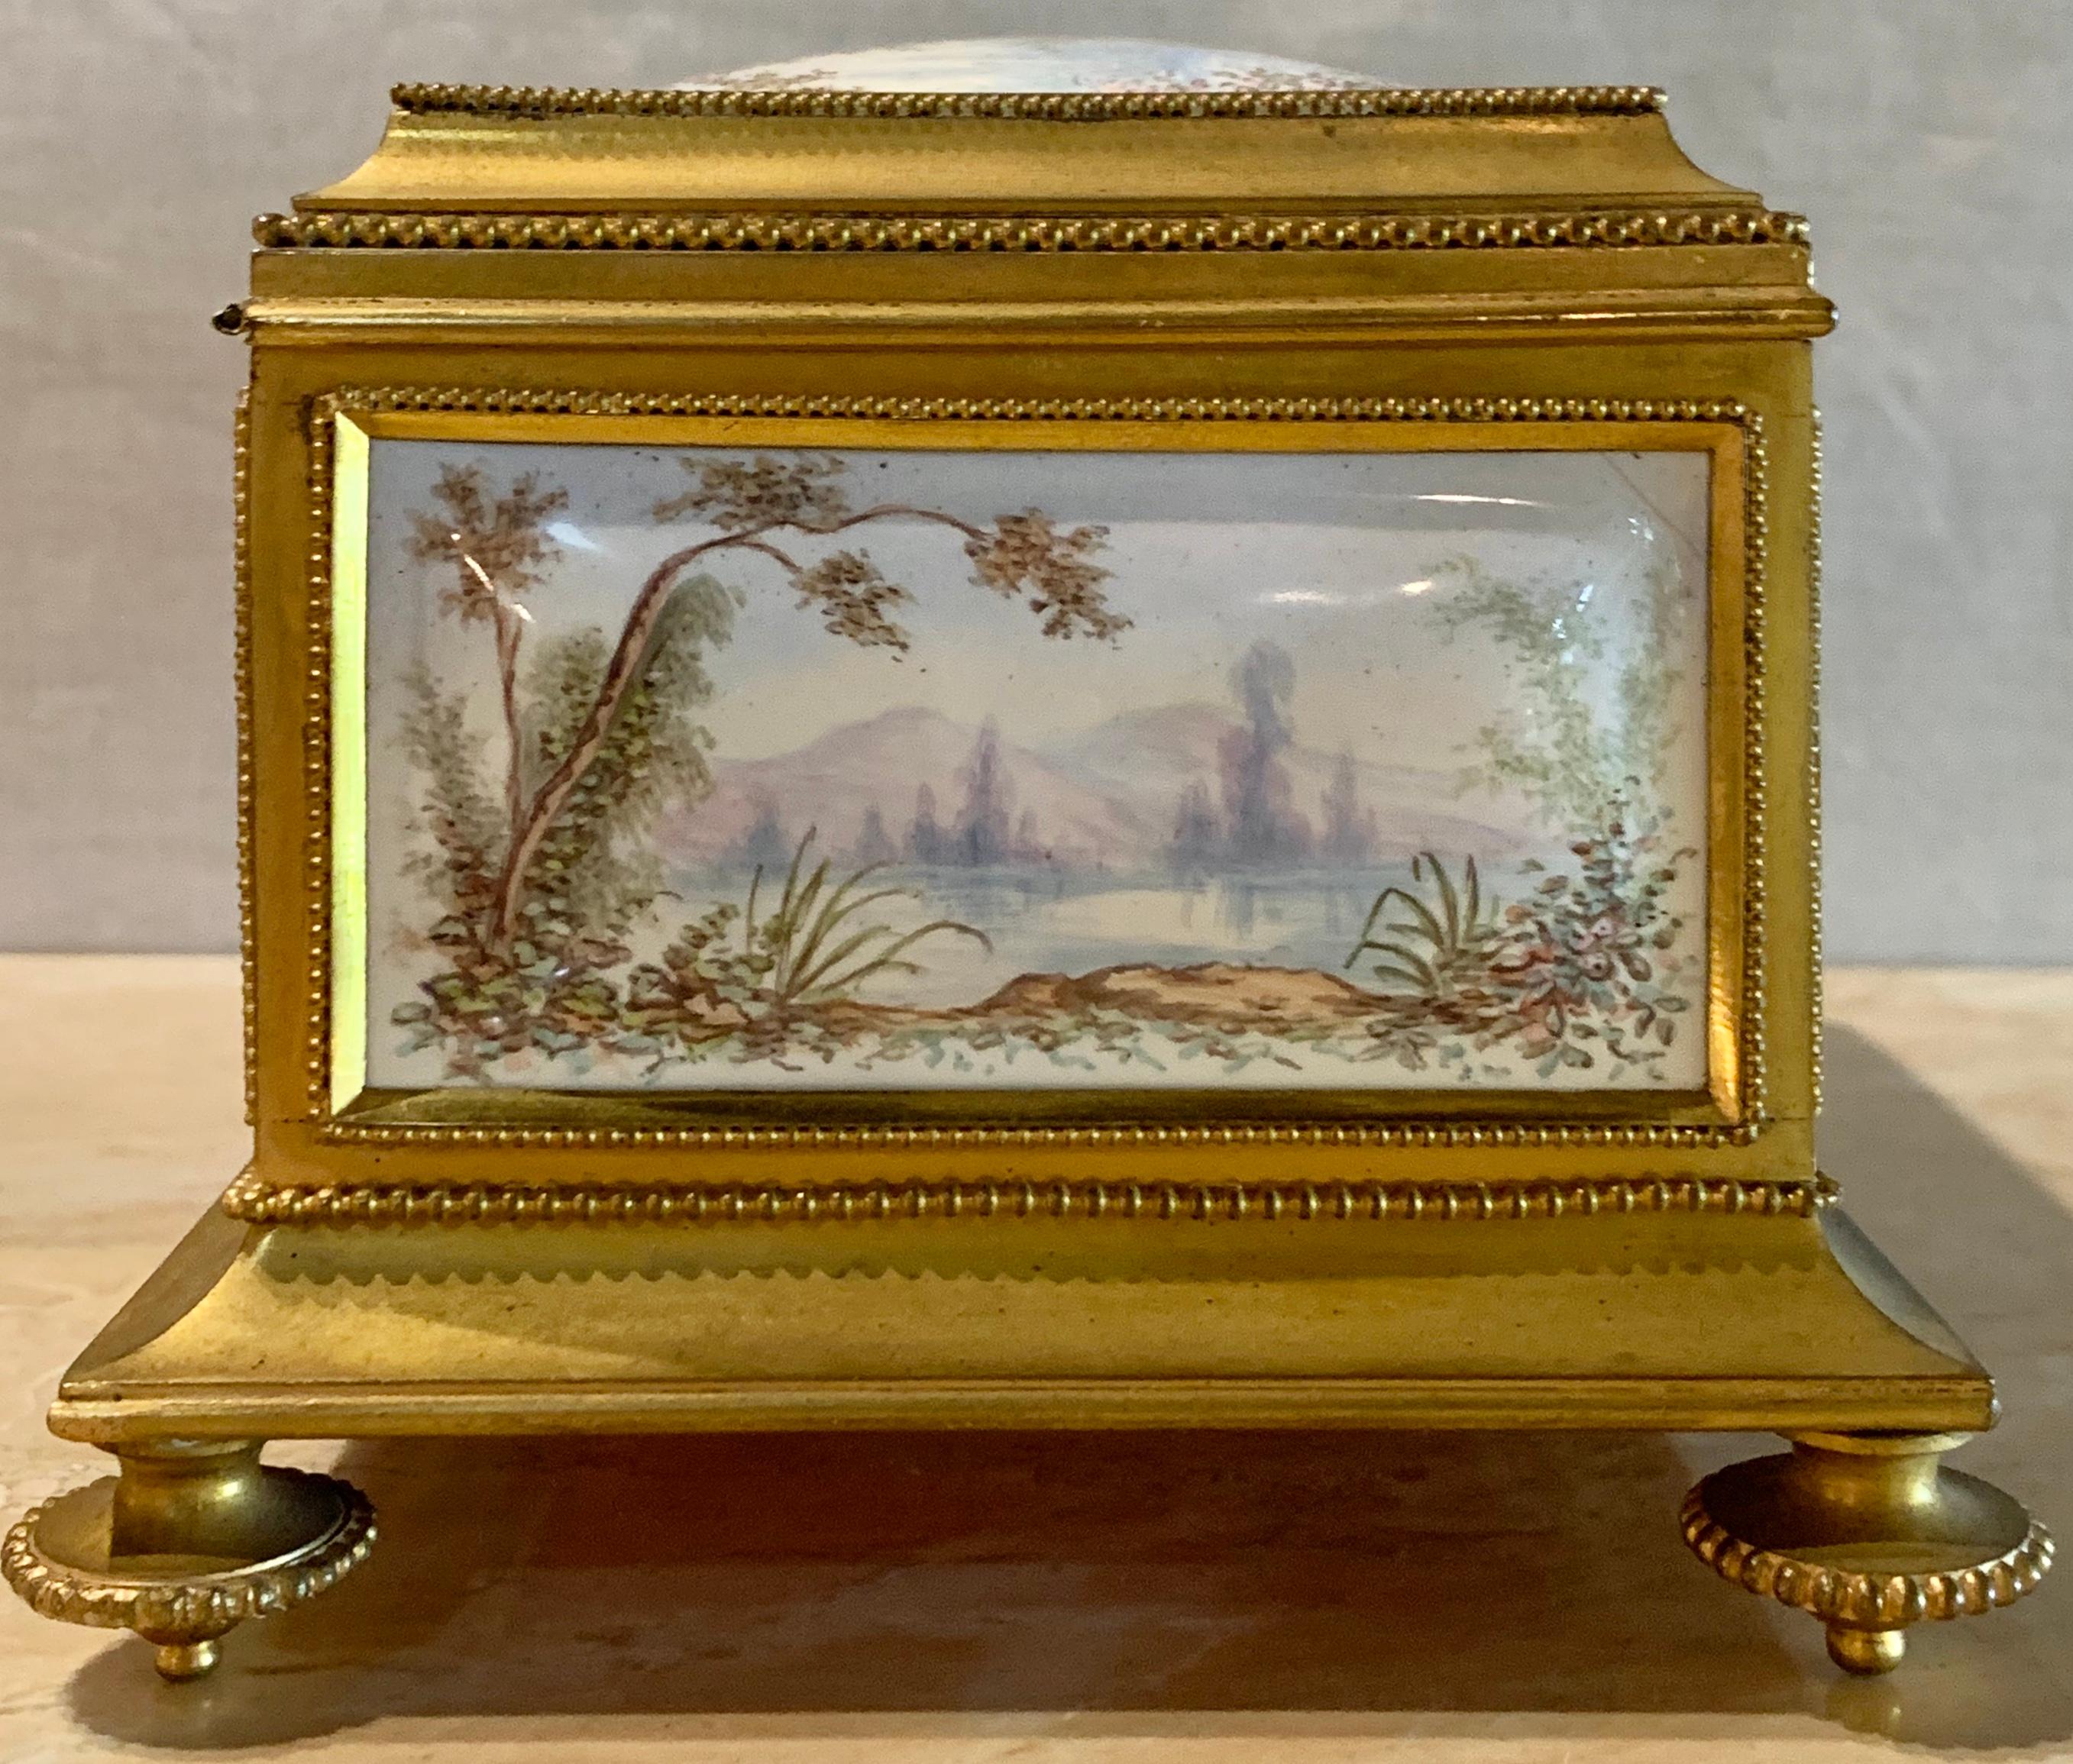 French 19th Century Gilt Bronze Enameled Jewelry Casket Box Lined Interior